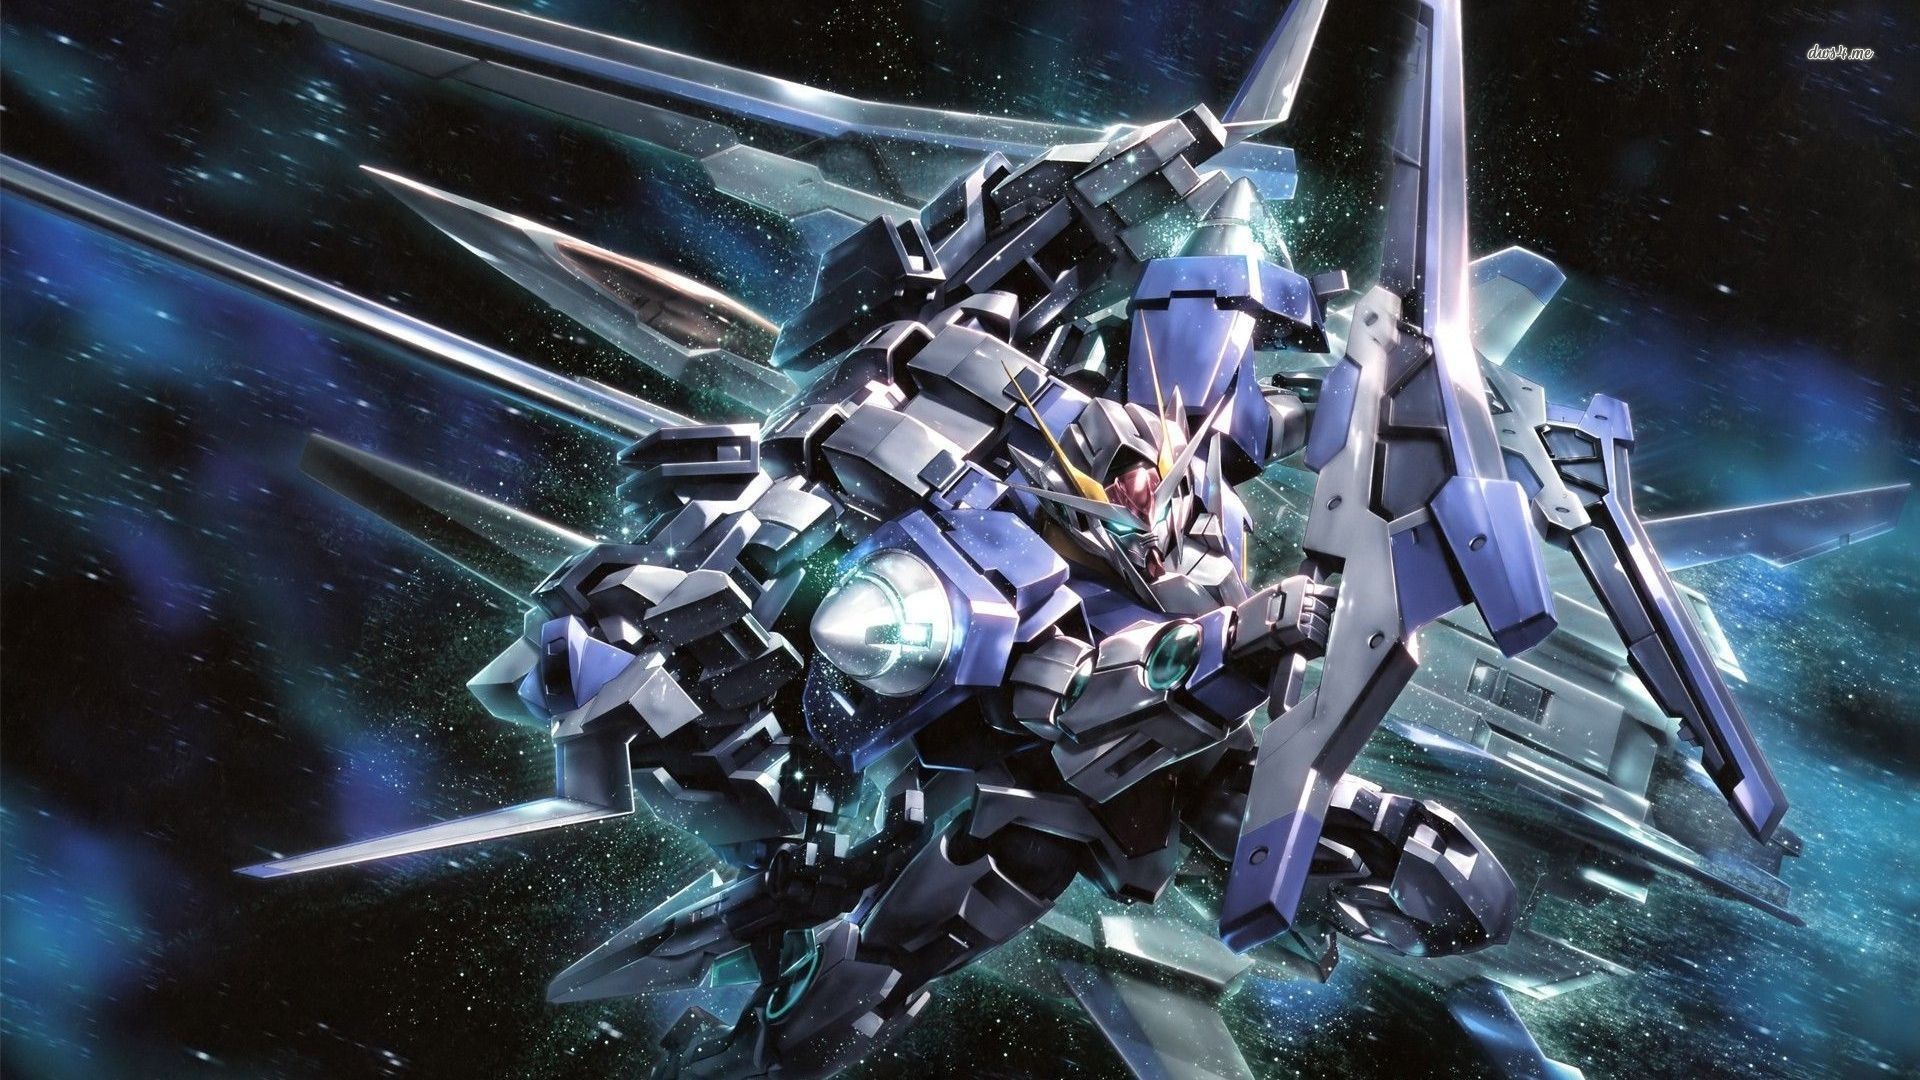 Gundam Desktop Wallpaper With high-resolution 1920X1080 pixel. You can use this wallpaper for your Windows and Mac OS computers as well as your Android and iPhone smartphones